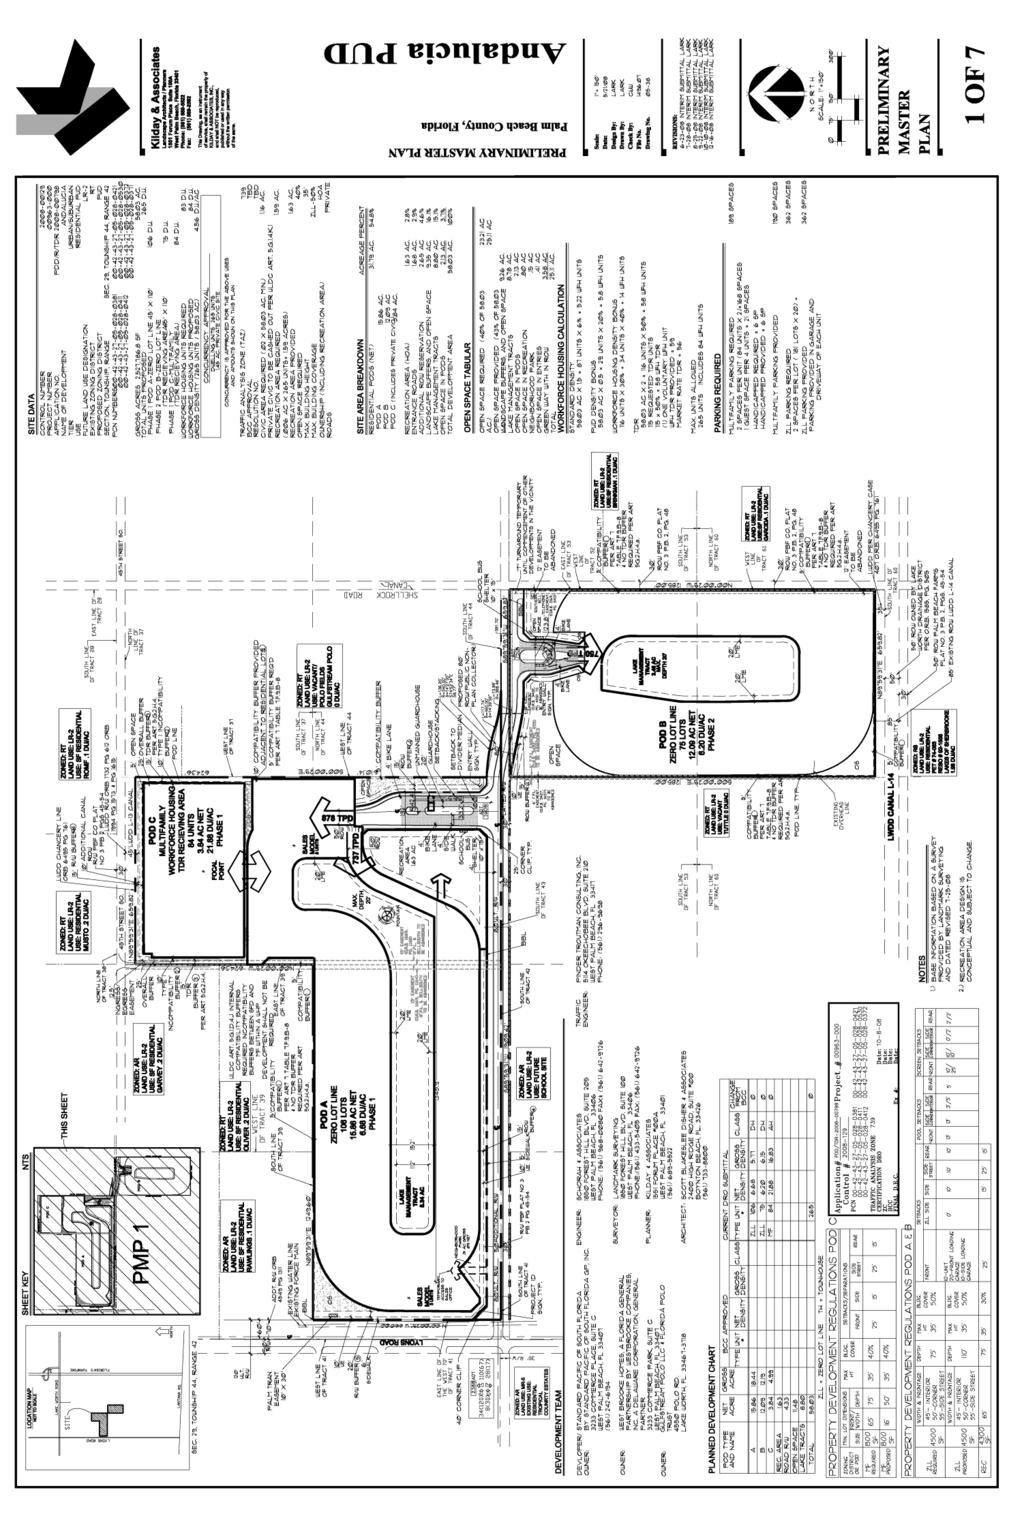 Figure 7 BCC Preliminary Master Plan dated